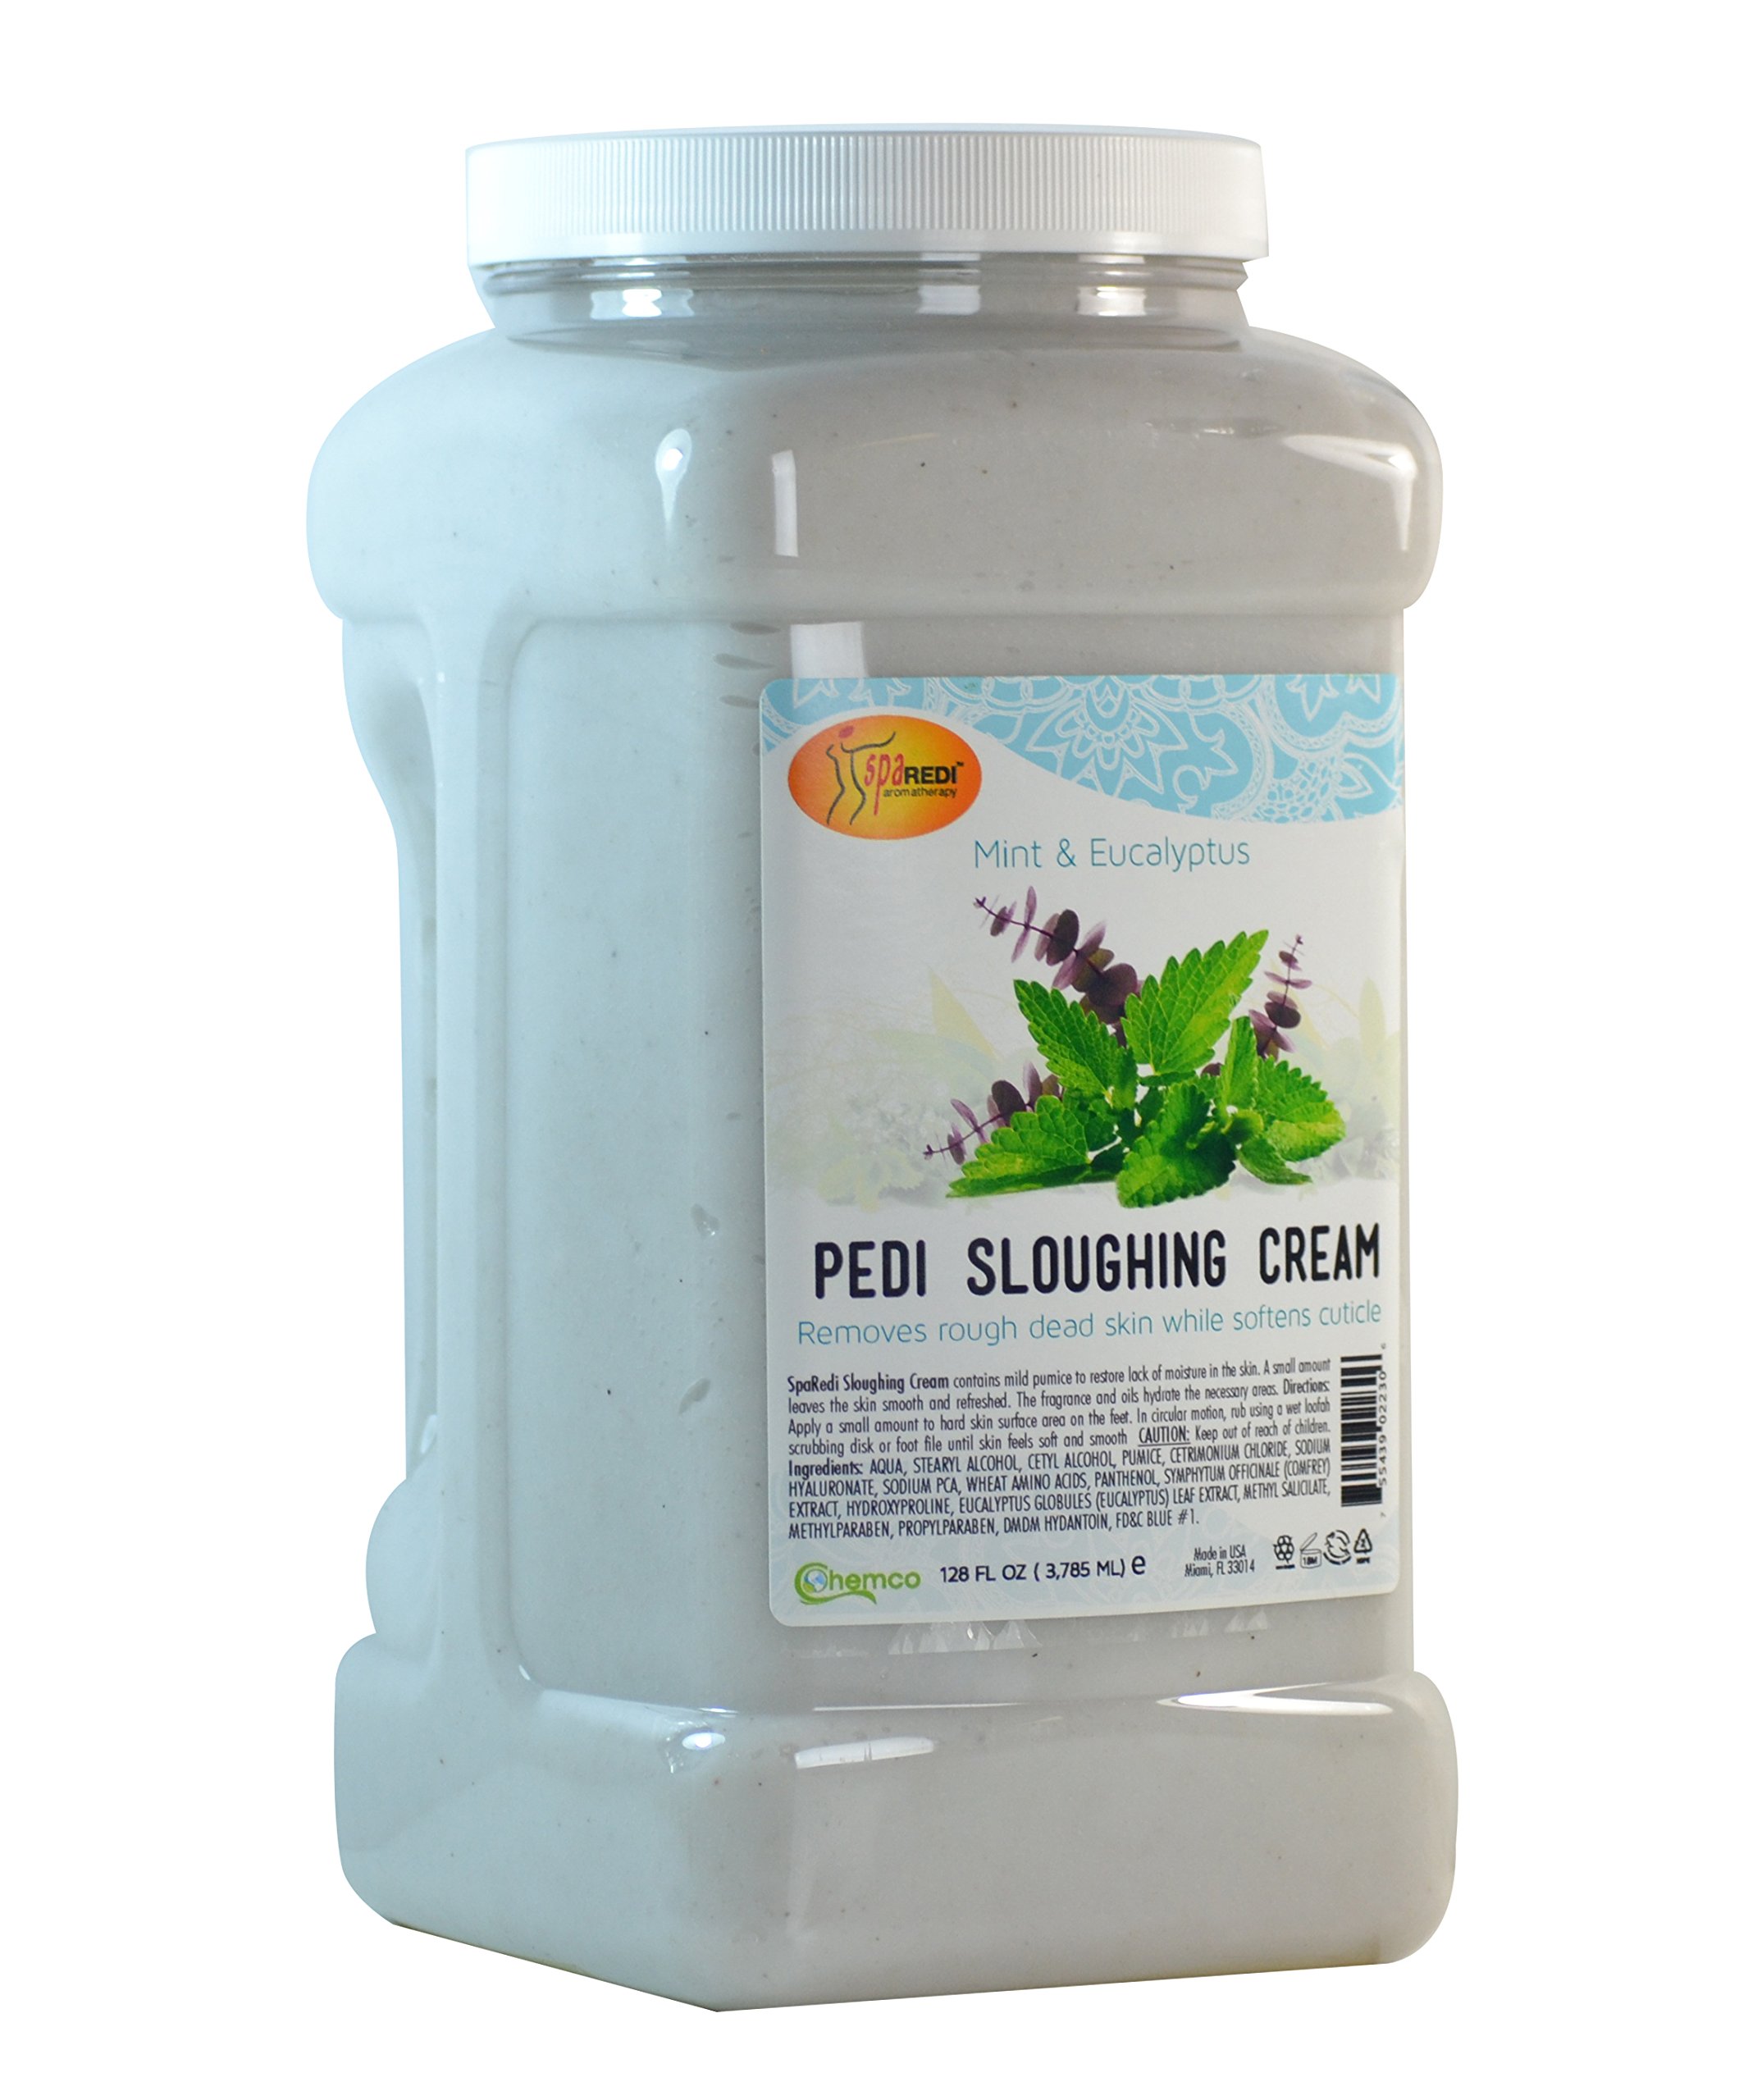 SPA REDI - Foot Cream, Sloughing Lotion, Mint and Eucalyptus 128 Oz - Pedicure Massage Foot Care for Dry Cracked Feet, Scrub Gently, Exfoliating, Smooths and Eliminates Buildup of Dead Skin